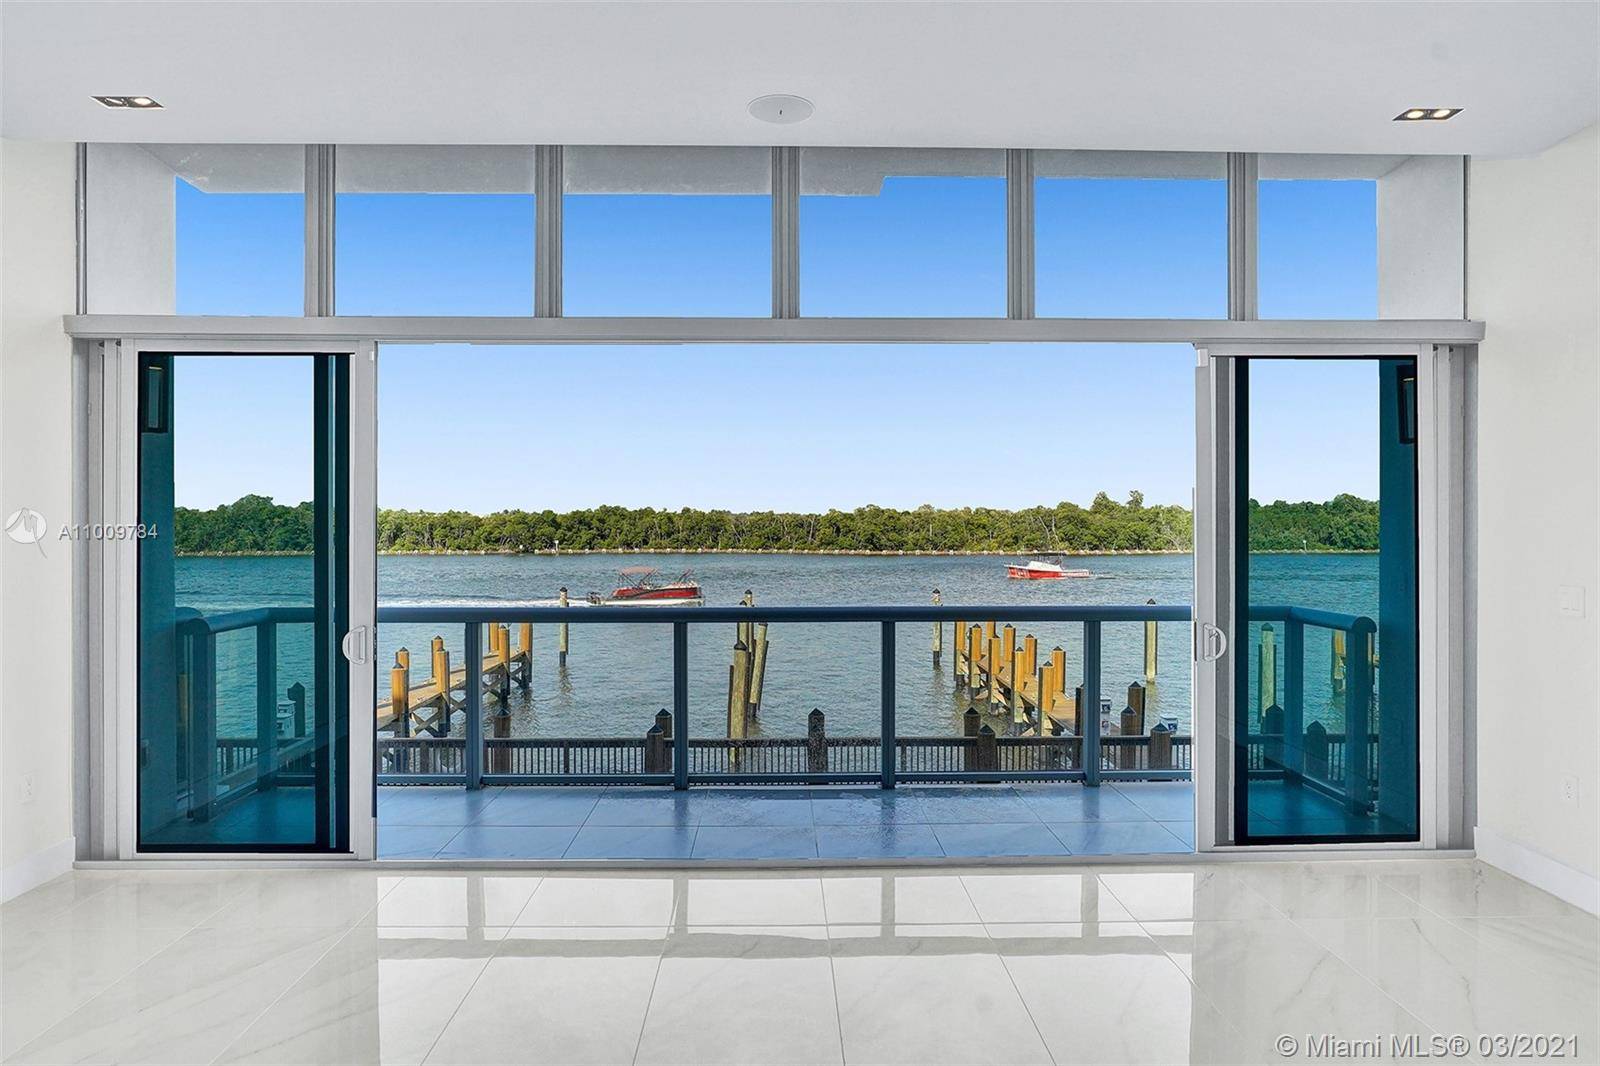 Quint Collection Hollywood, 10 luxury gated waterfront townhomes with a private marina unobstructed views of the Atlantic Ocean on the Sunrise side the Anne Kolb Nature Preserve on the Sunset ...